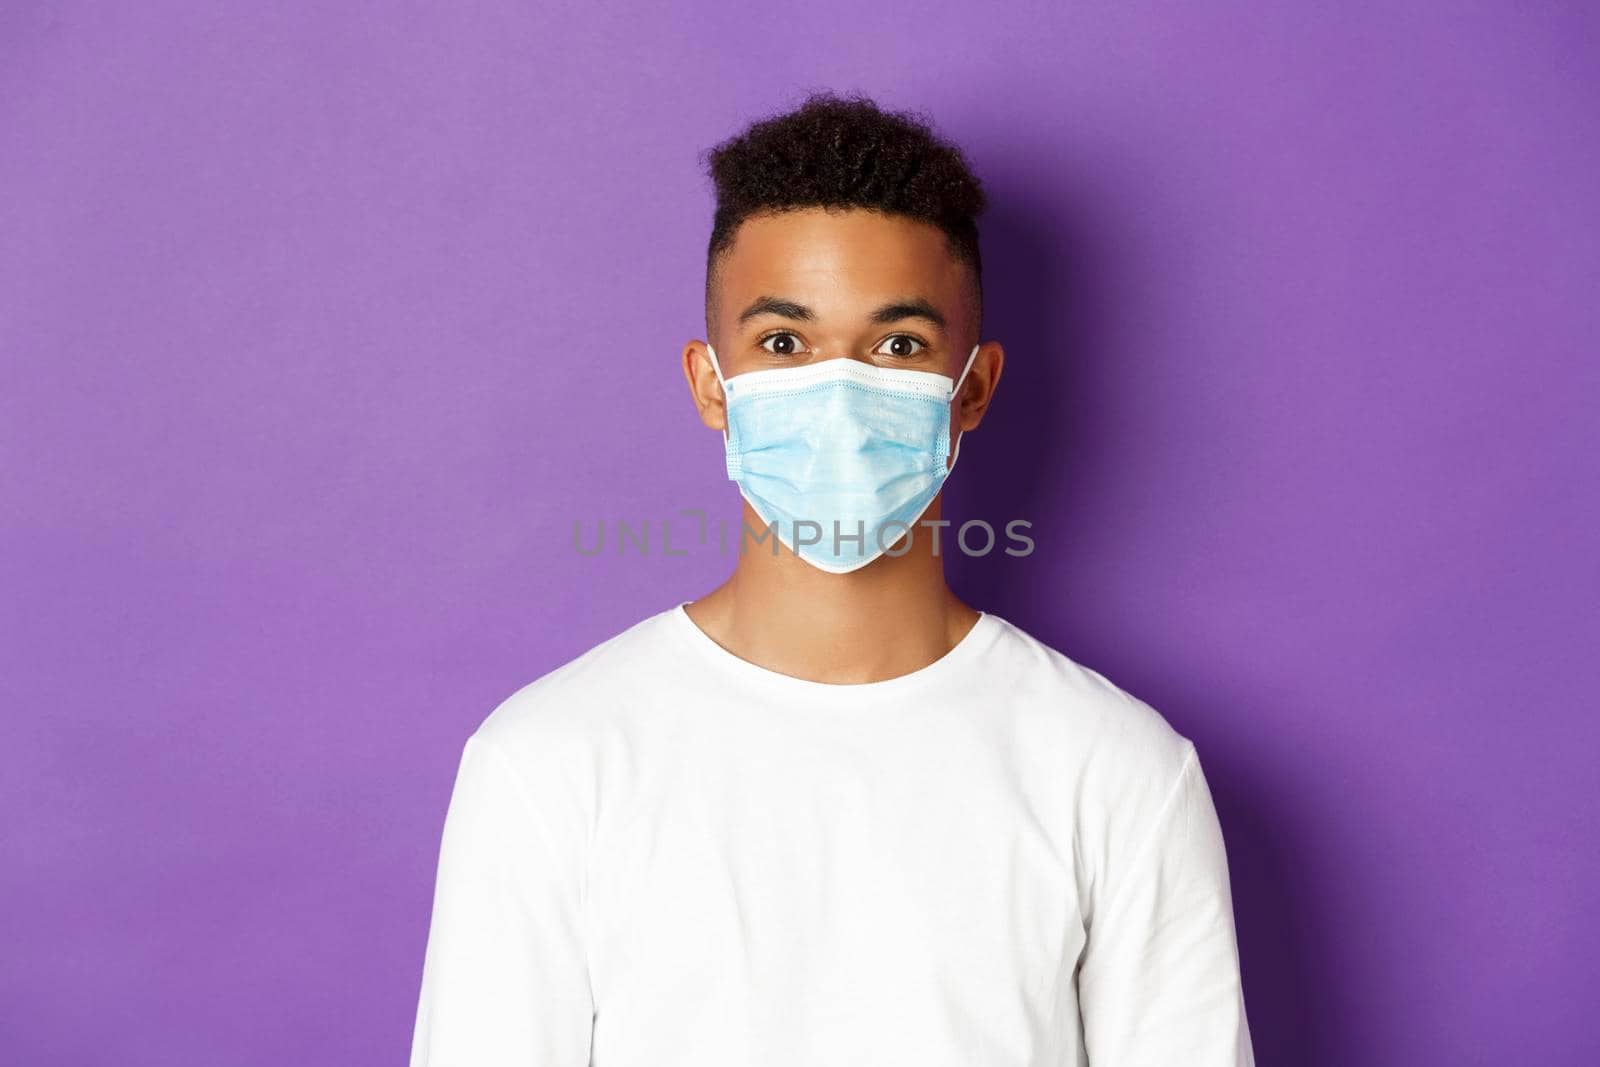 Concept of coronavirus, quarantine and social distancing. Close-up of young african-american guy in white sweatshirt and medical mask, looking at camera, standing over purple background.